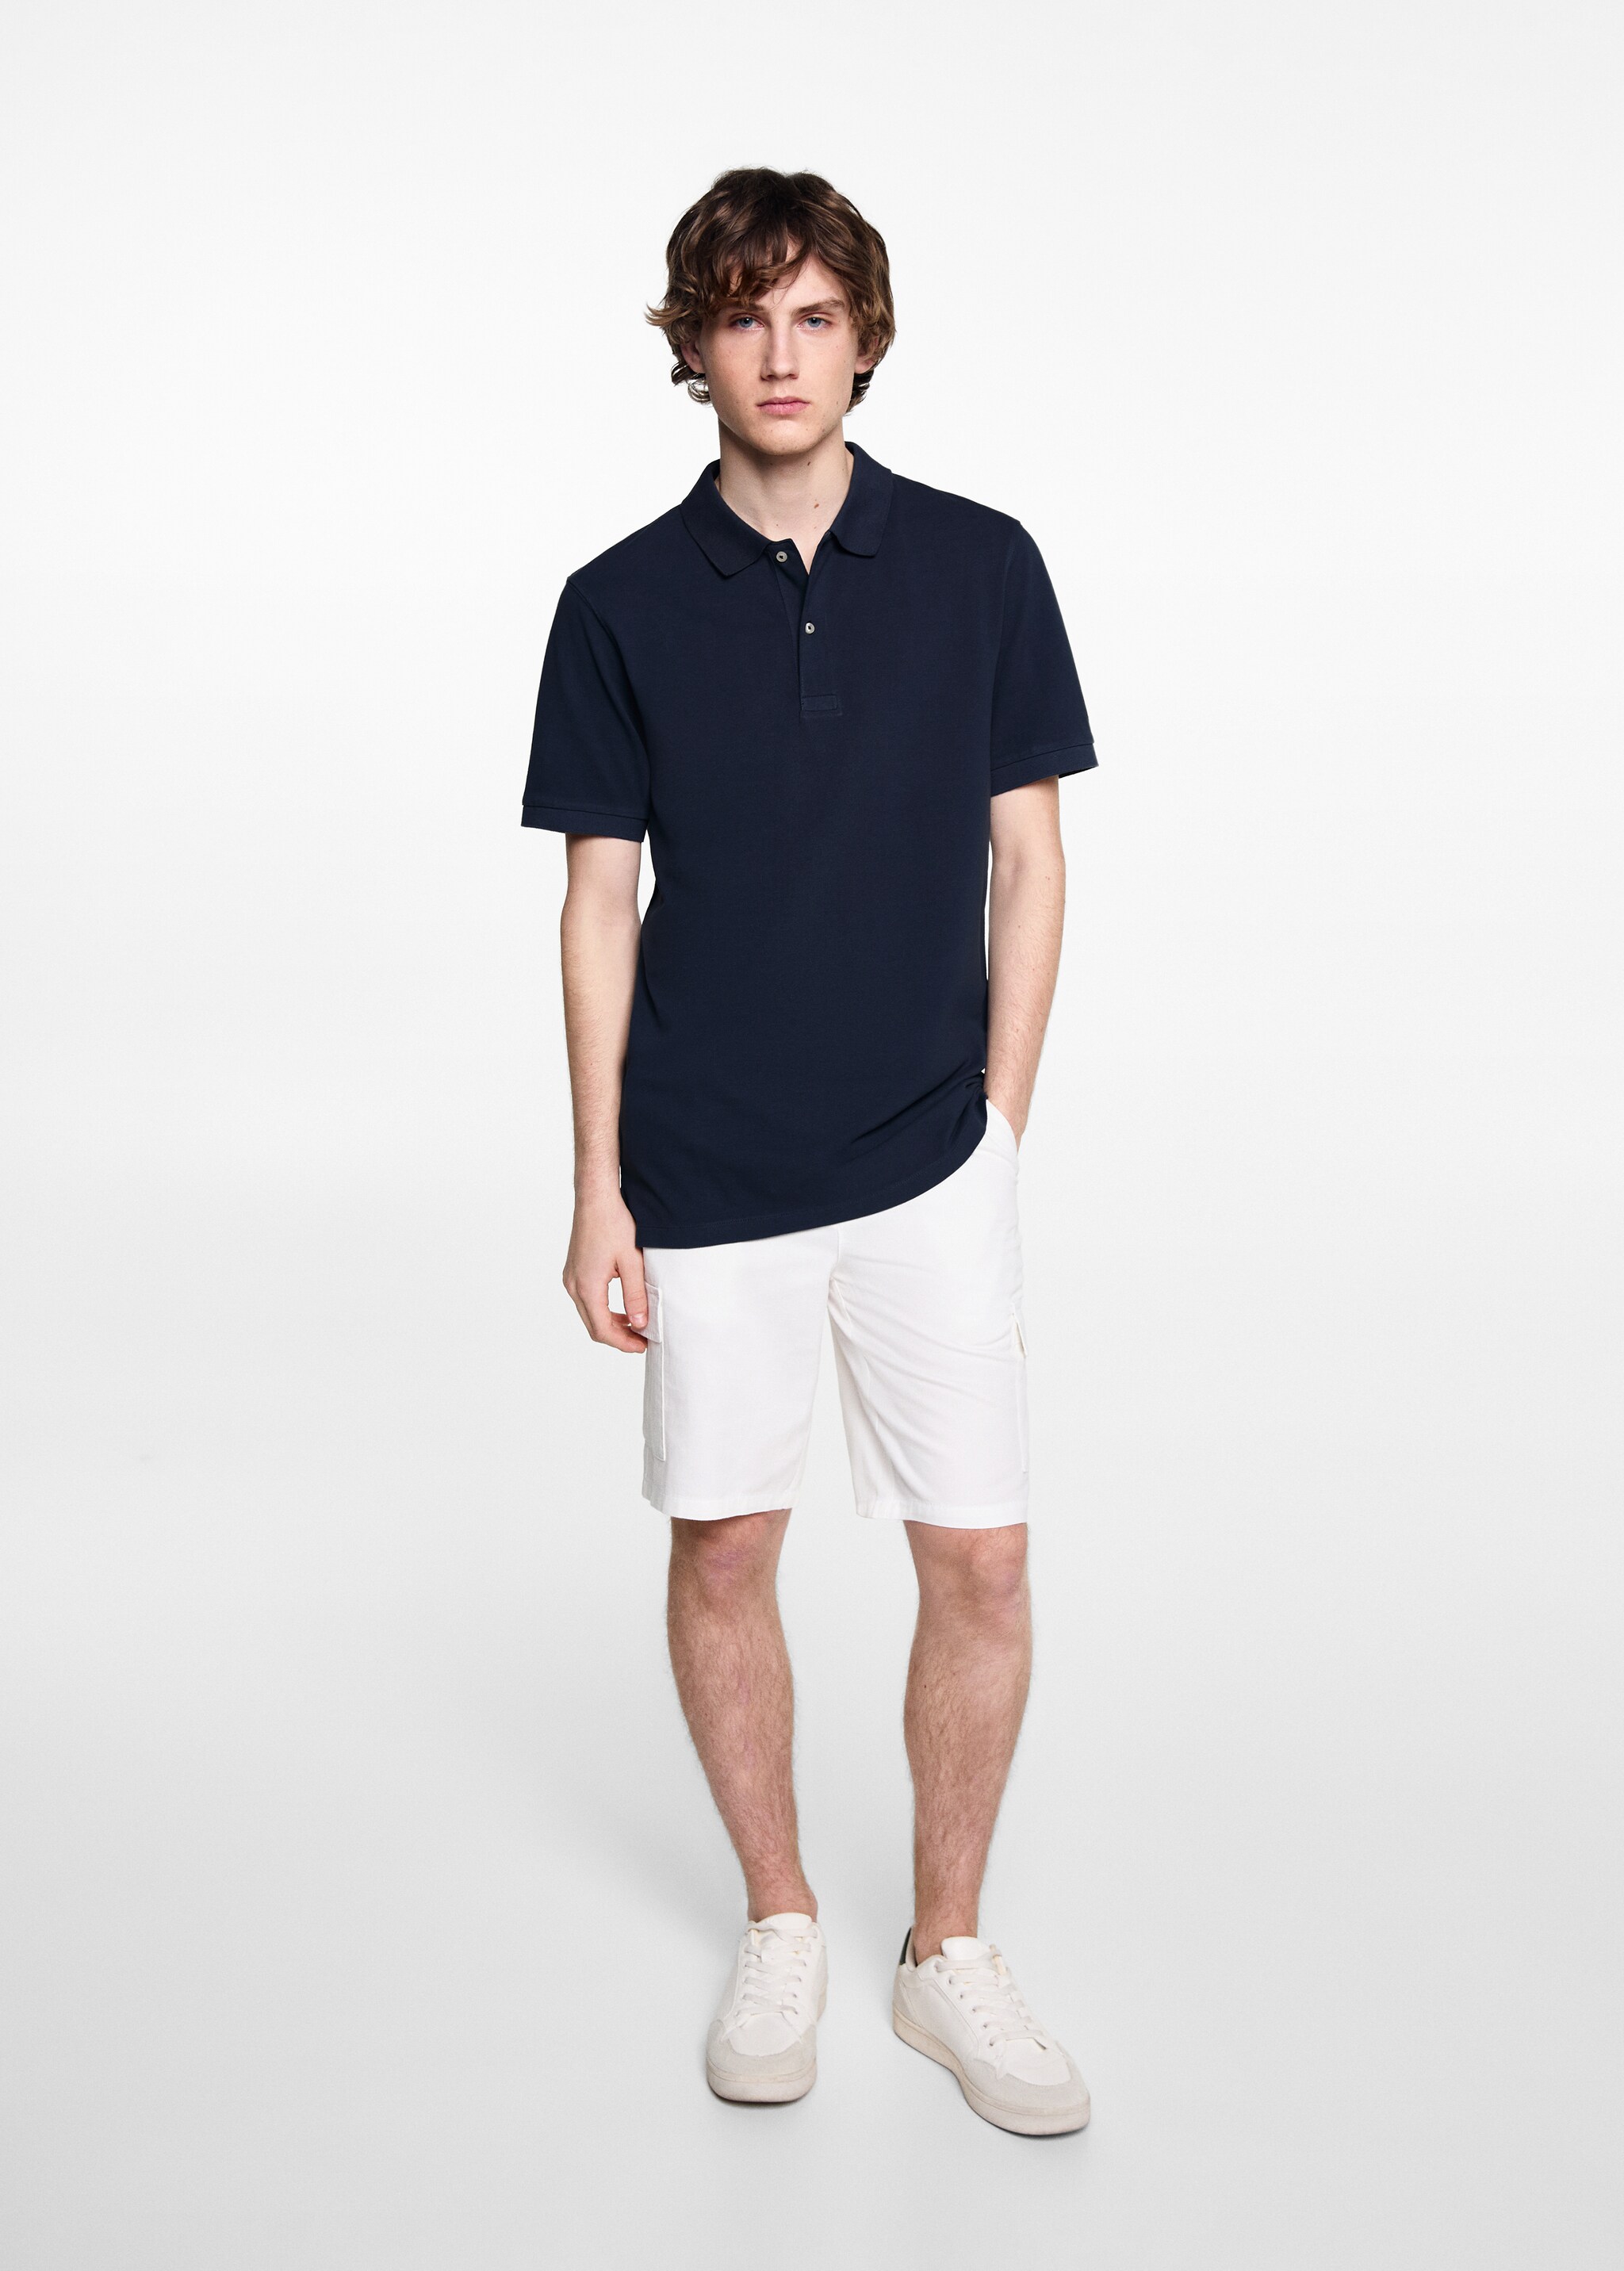 Short-sleeved cotton polo shirt - General plane